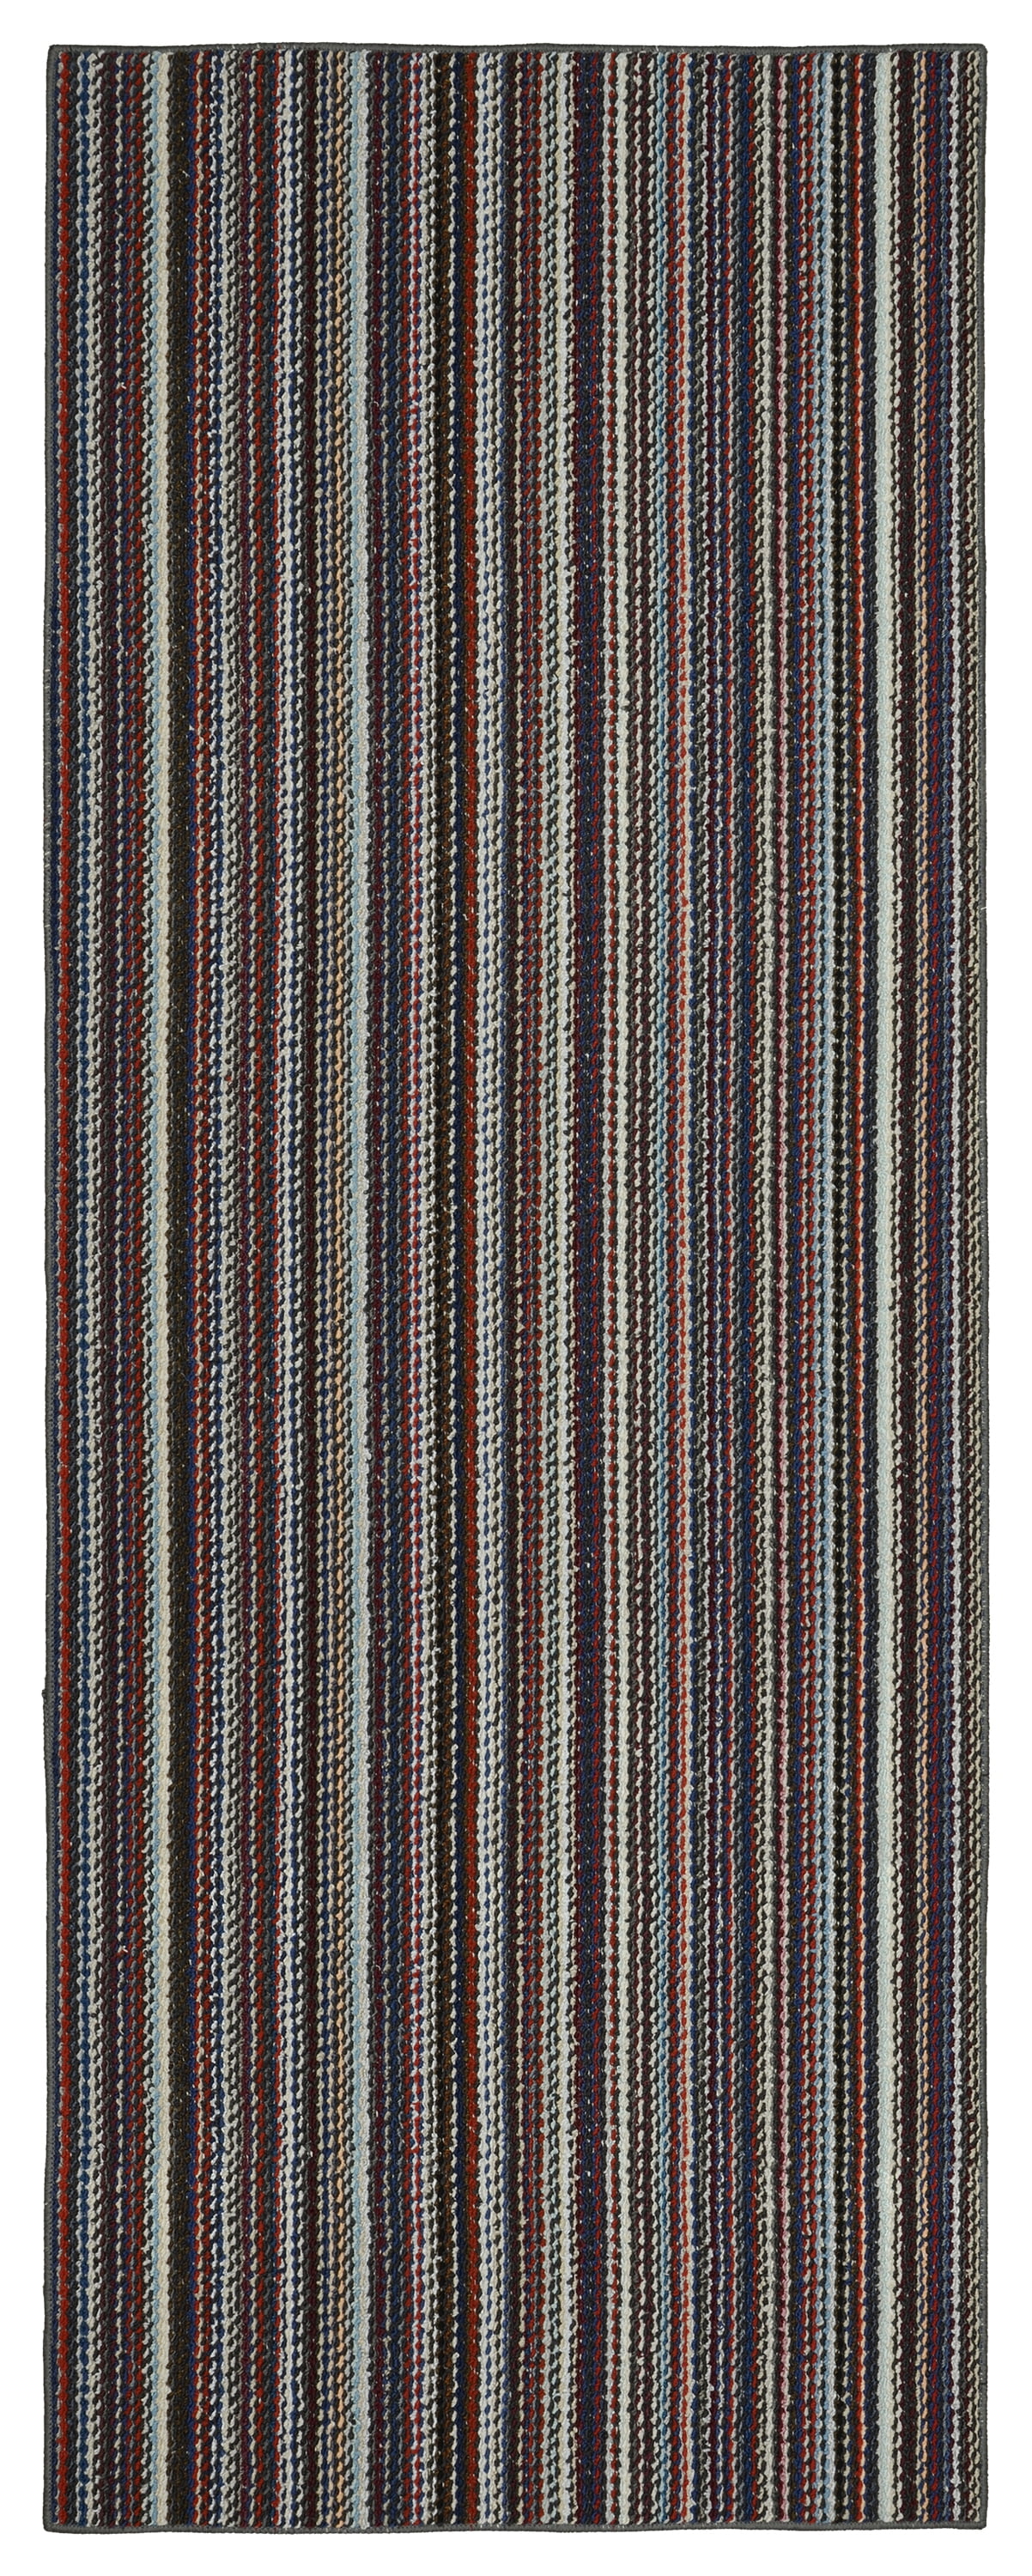 Details about   Throw Rug Geometric Blue Long Hallway Runner Area Accent Mat Carpet Scatter 8 ft 